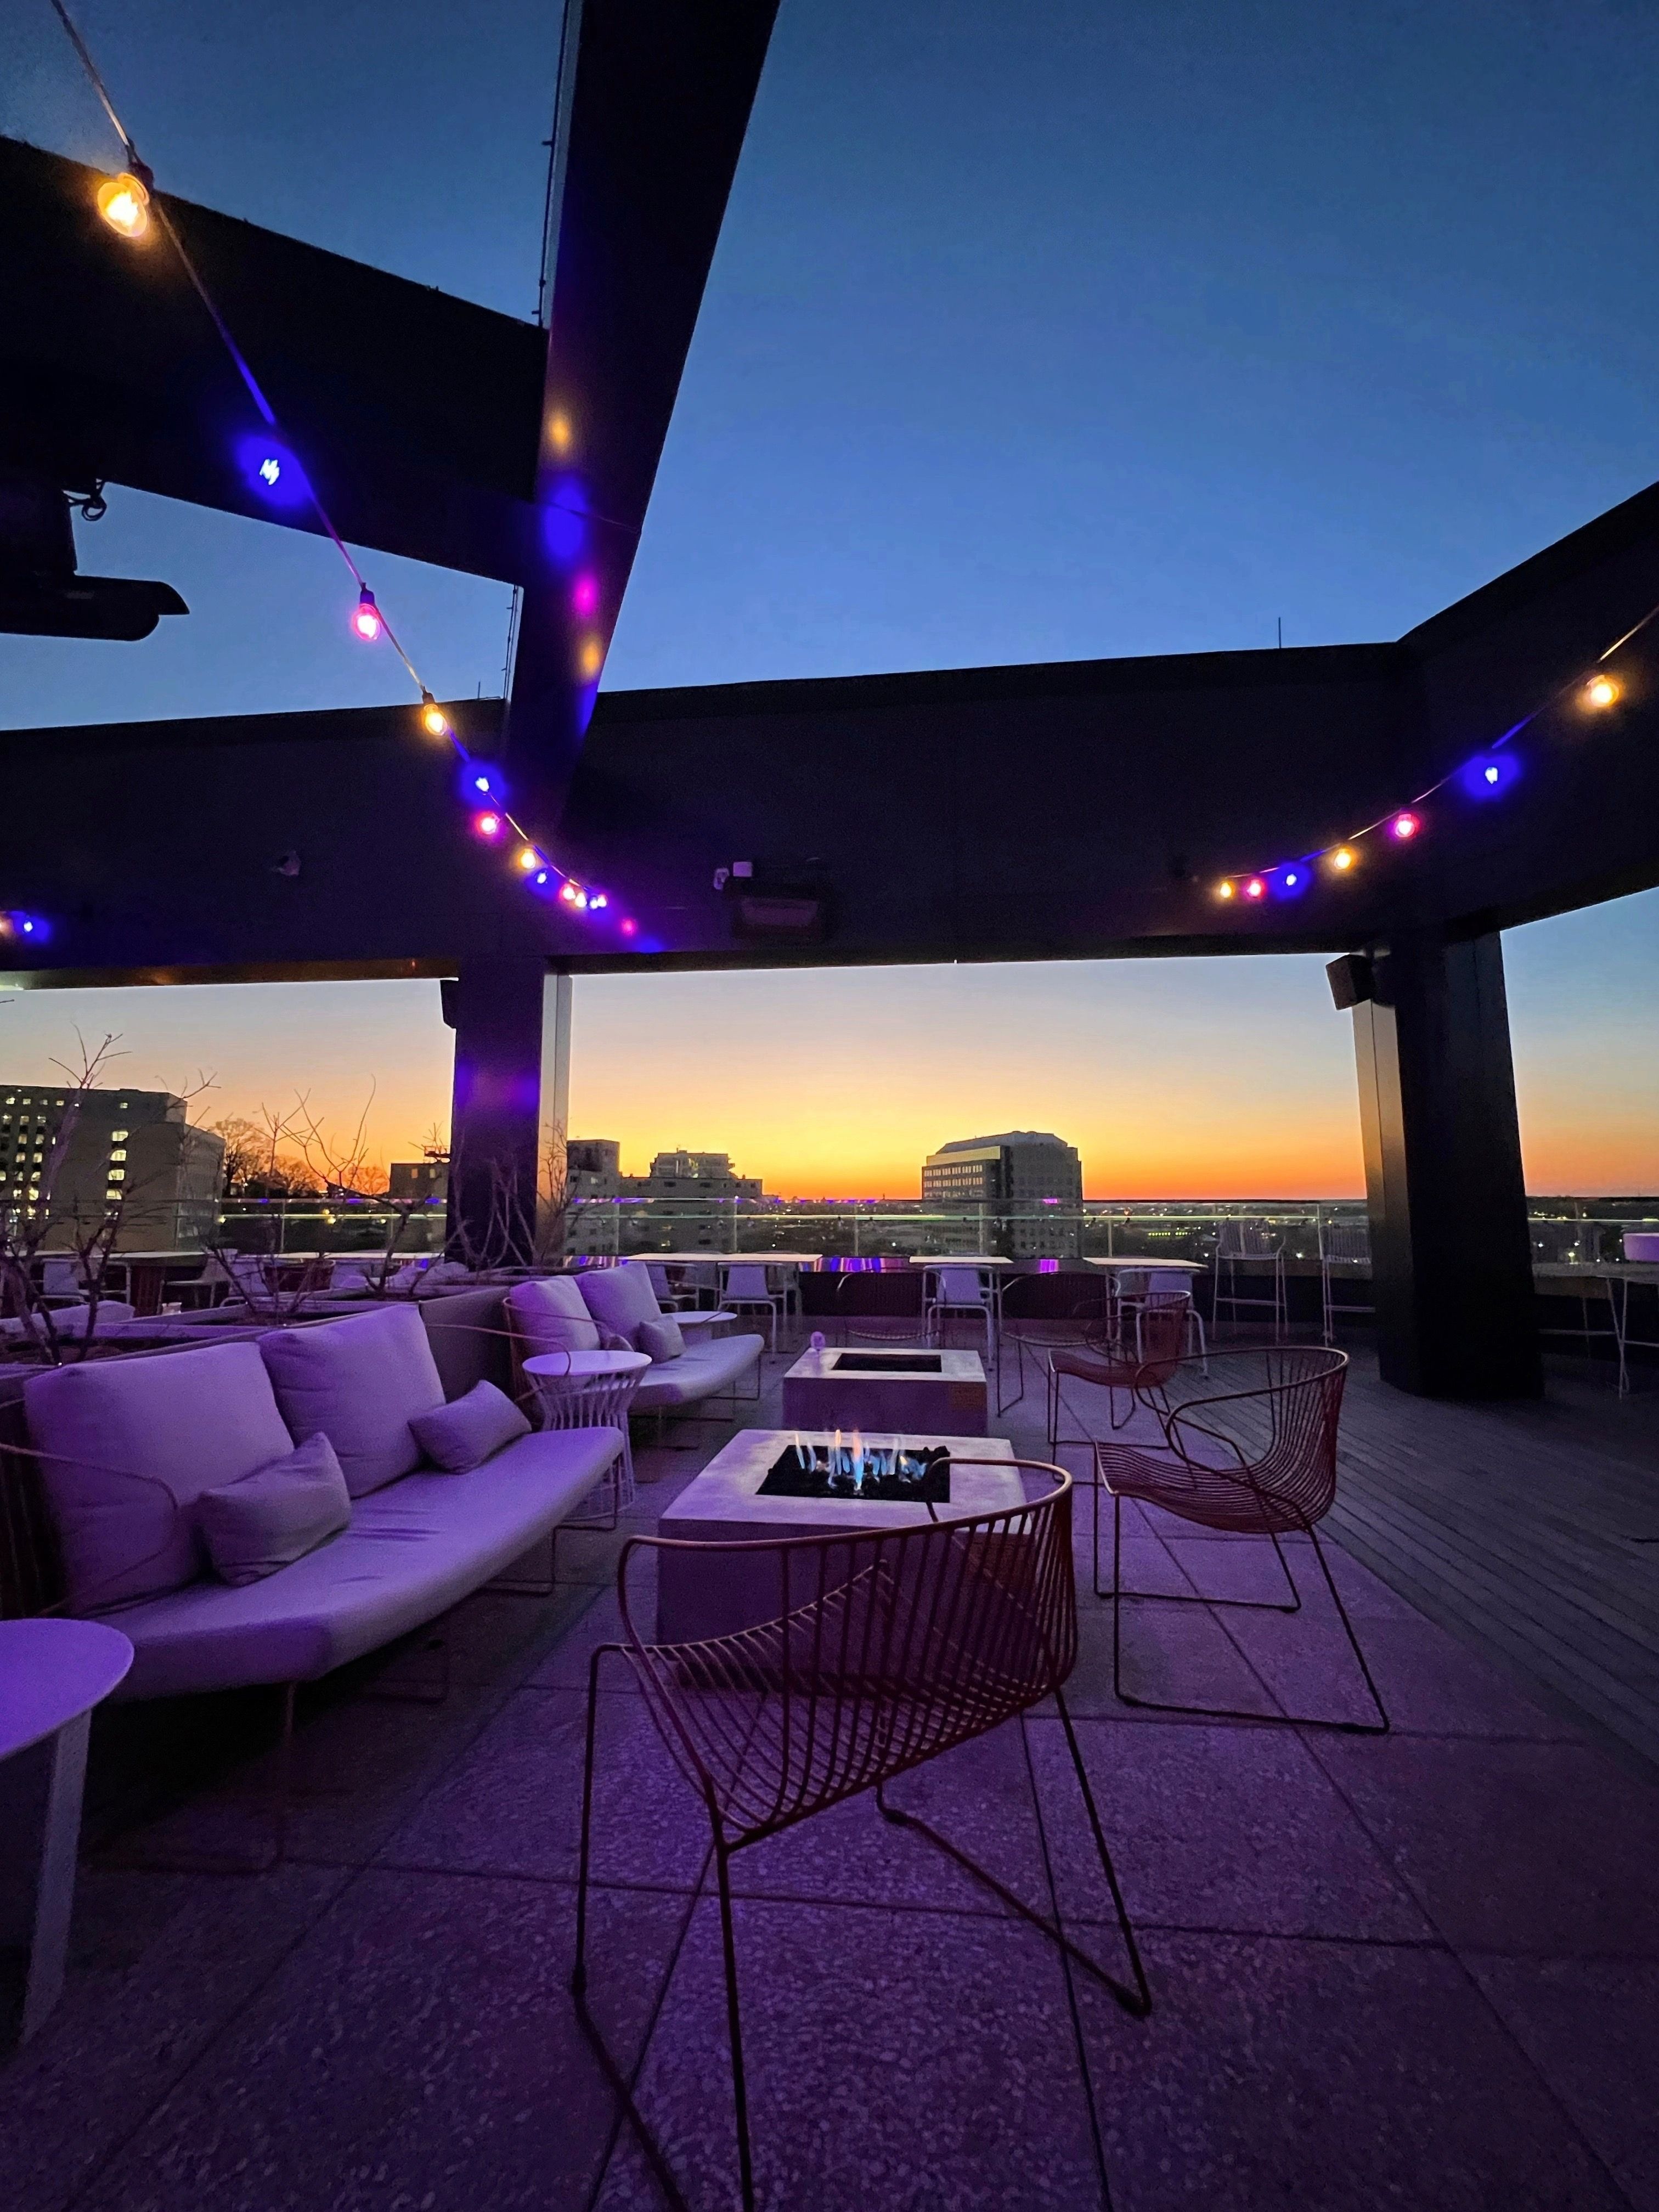 A rooftop bar at sunset